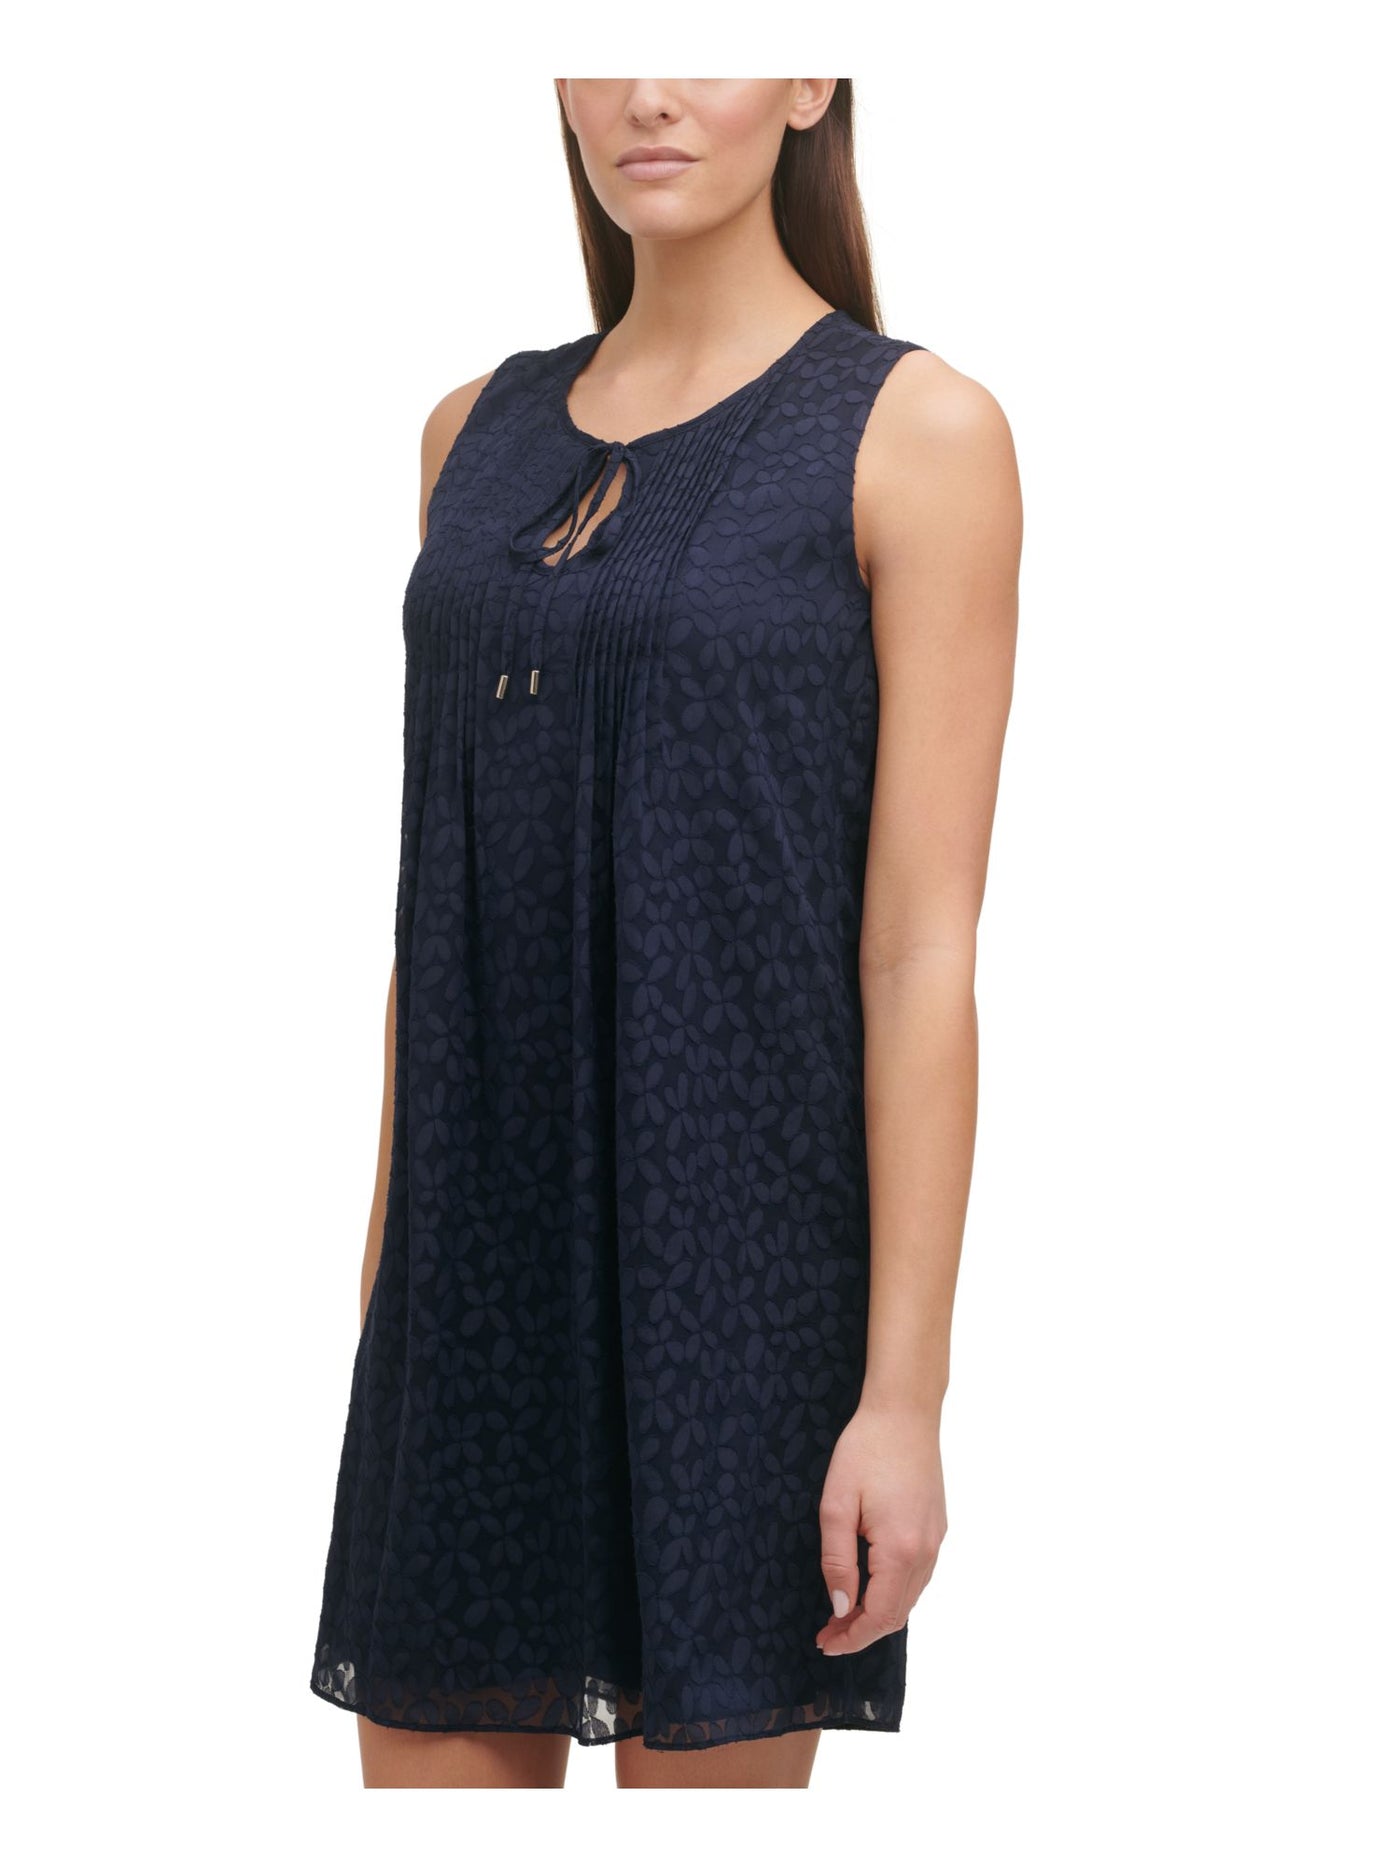 TOMMY HILFIGER Womens Navy Textured Pleated Lined Floral Sleeveless Keyhole Short Shift Dress 6